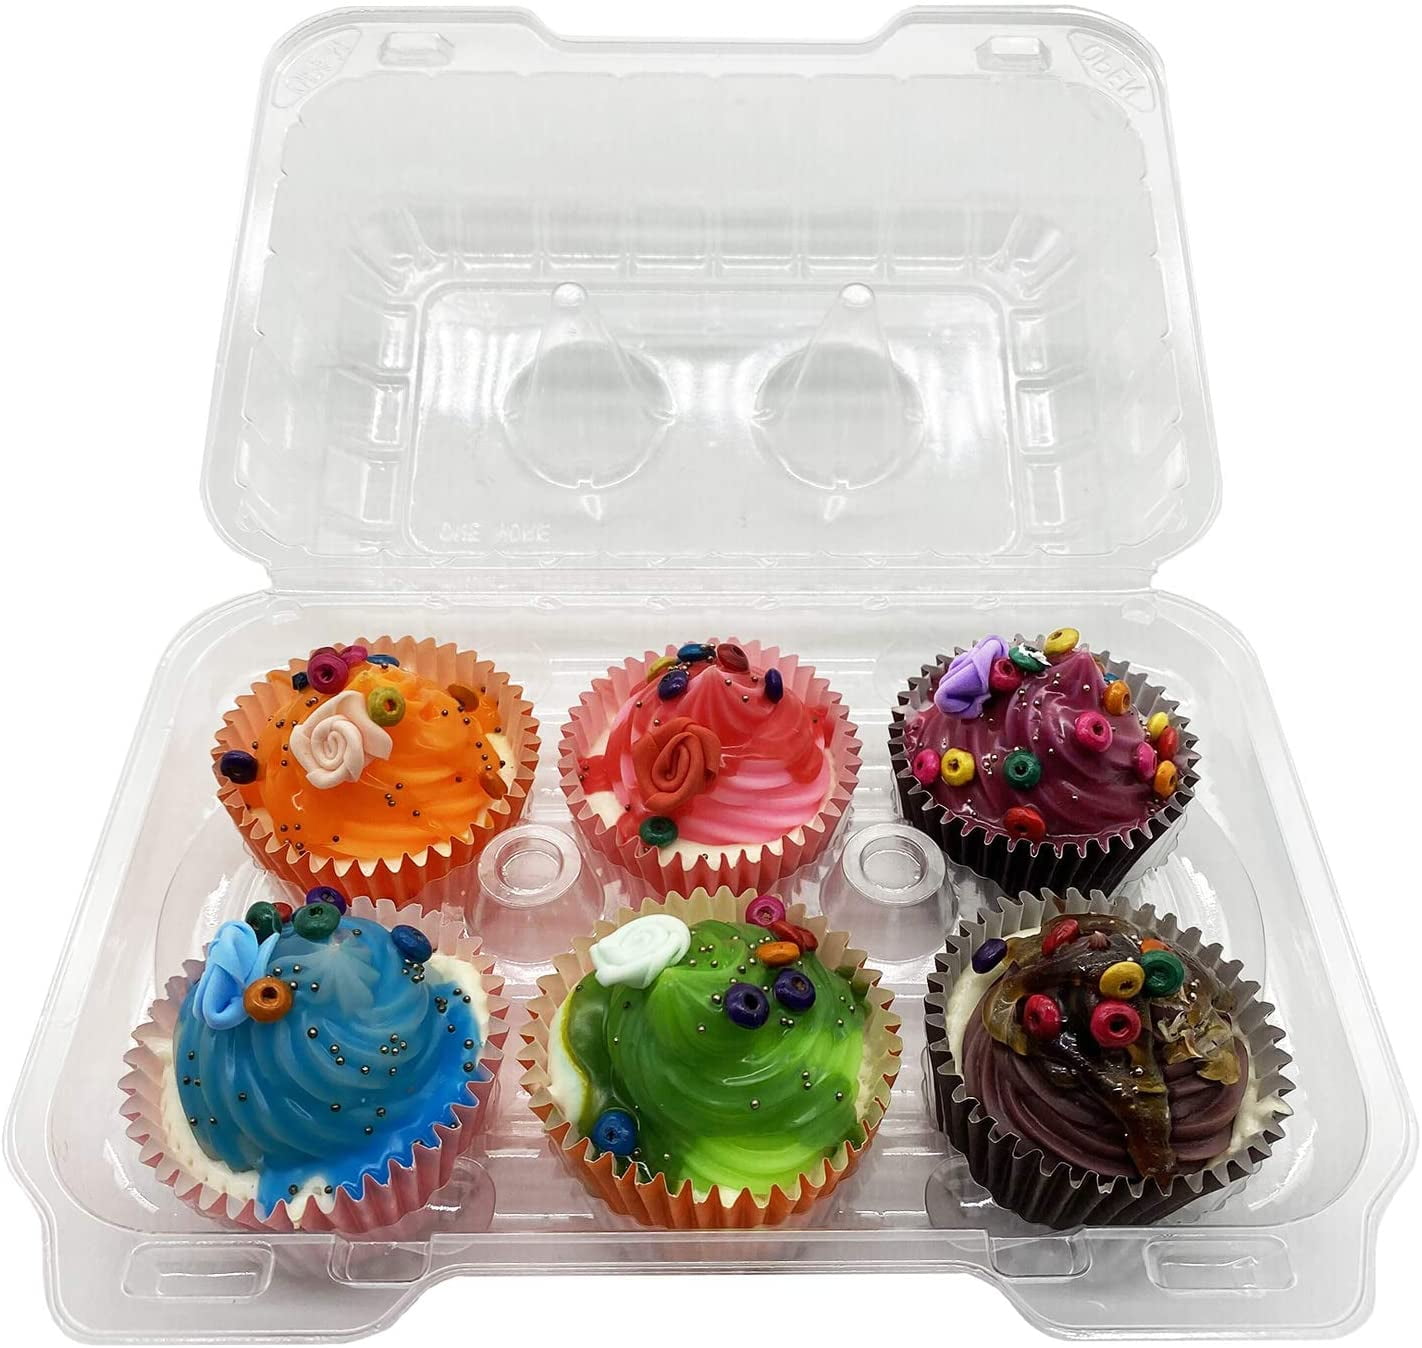 12pc Cupcake Containers Plastic Disposable,High Dome Cupcake Boxes 6 Compartment Cupcake Holders Disposable Cupcake Containers Half Dozen Cupcake Trays Durable Cup Cake Muffin Packaging Transporter 